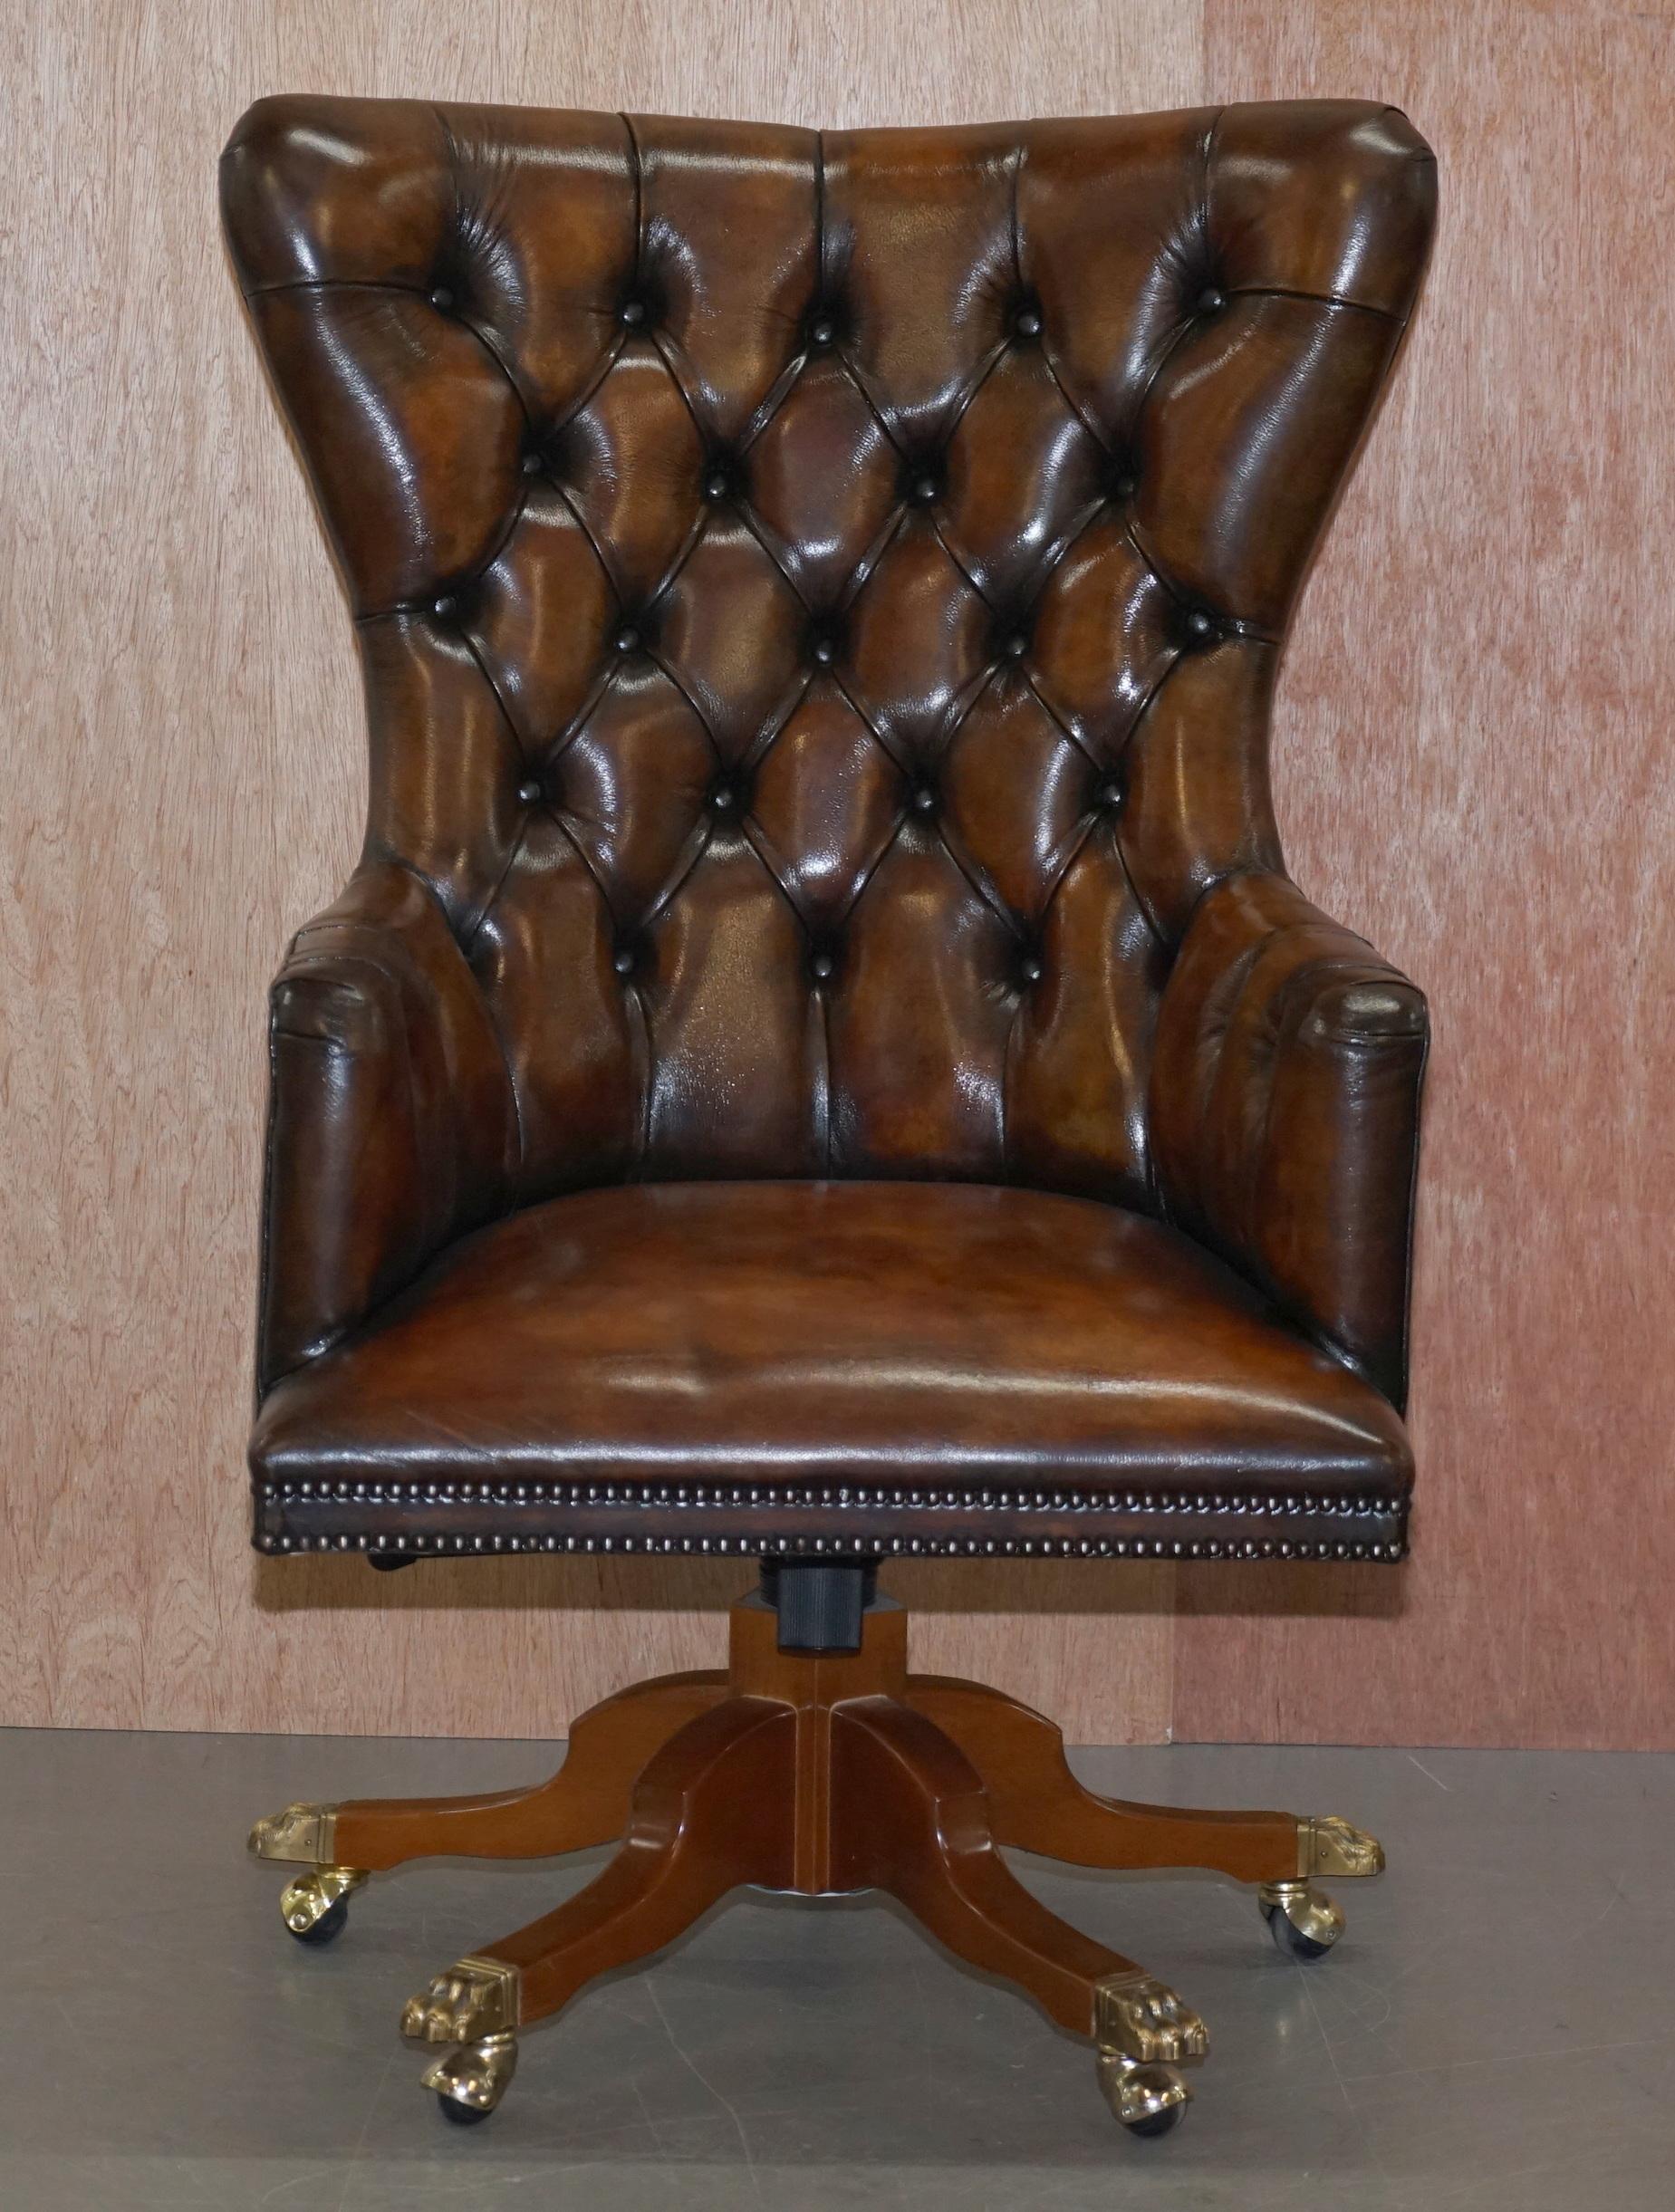 We are delighted to offer for sale this stunning fully restored Harrods London hand dyed Whiskey brown leather exceptionally comfortable directors chair 

This is pretty much the most comfortable captains chair I have ever sat it, its like your